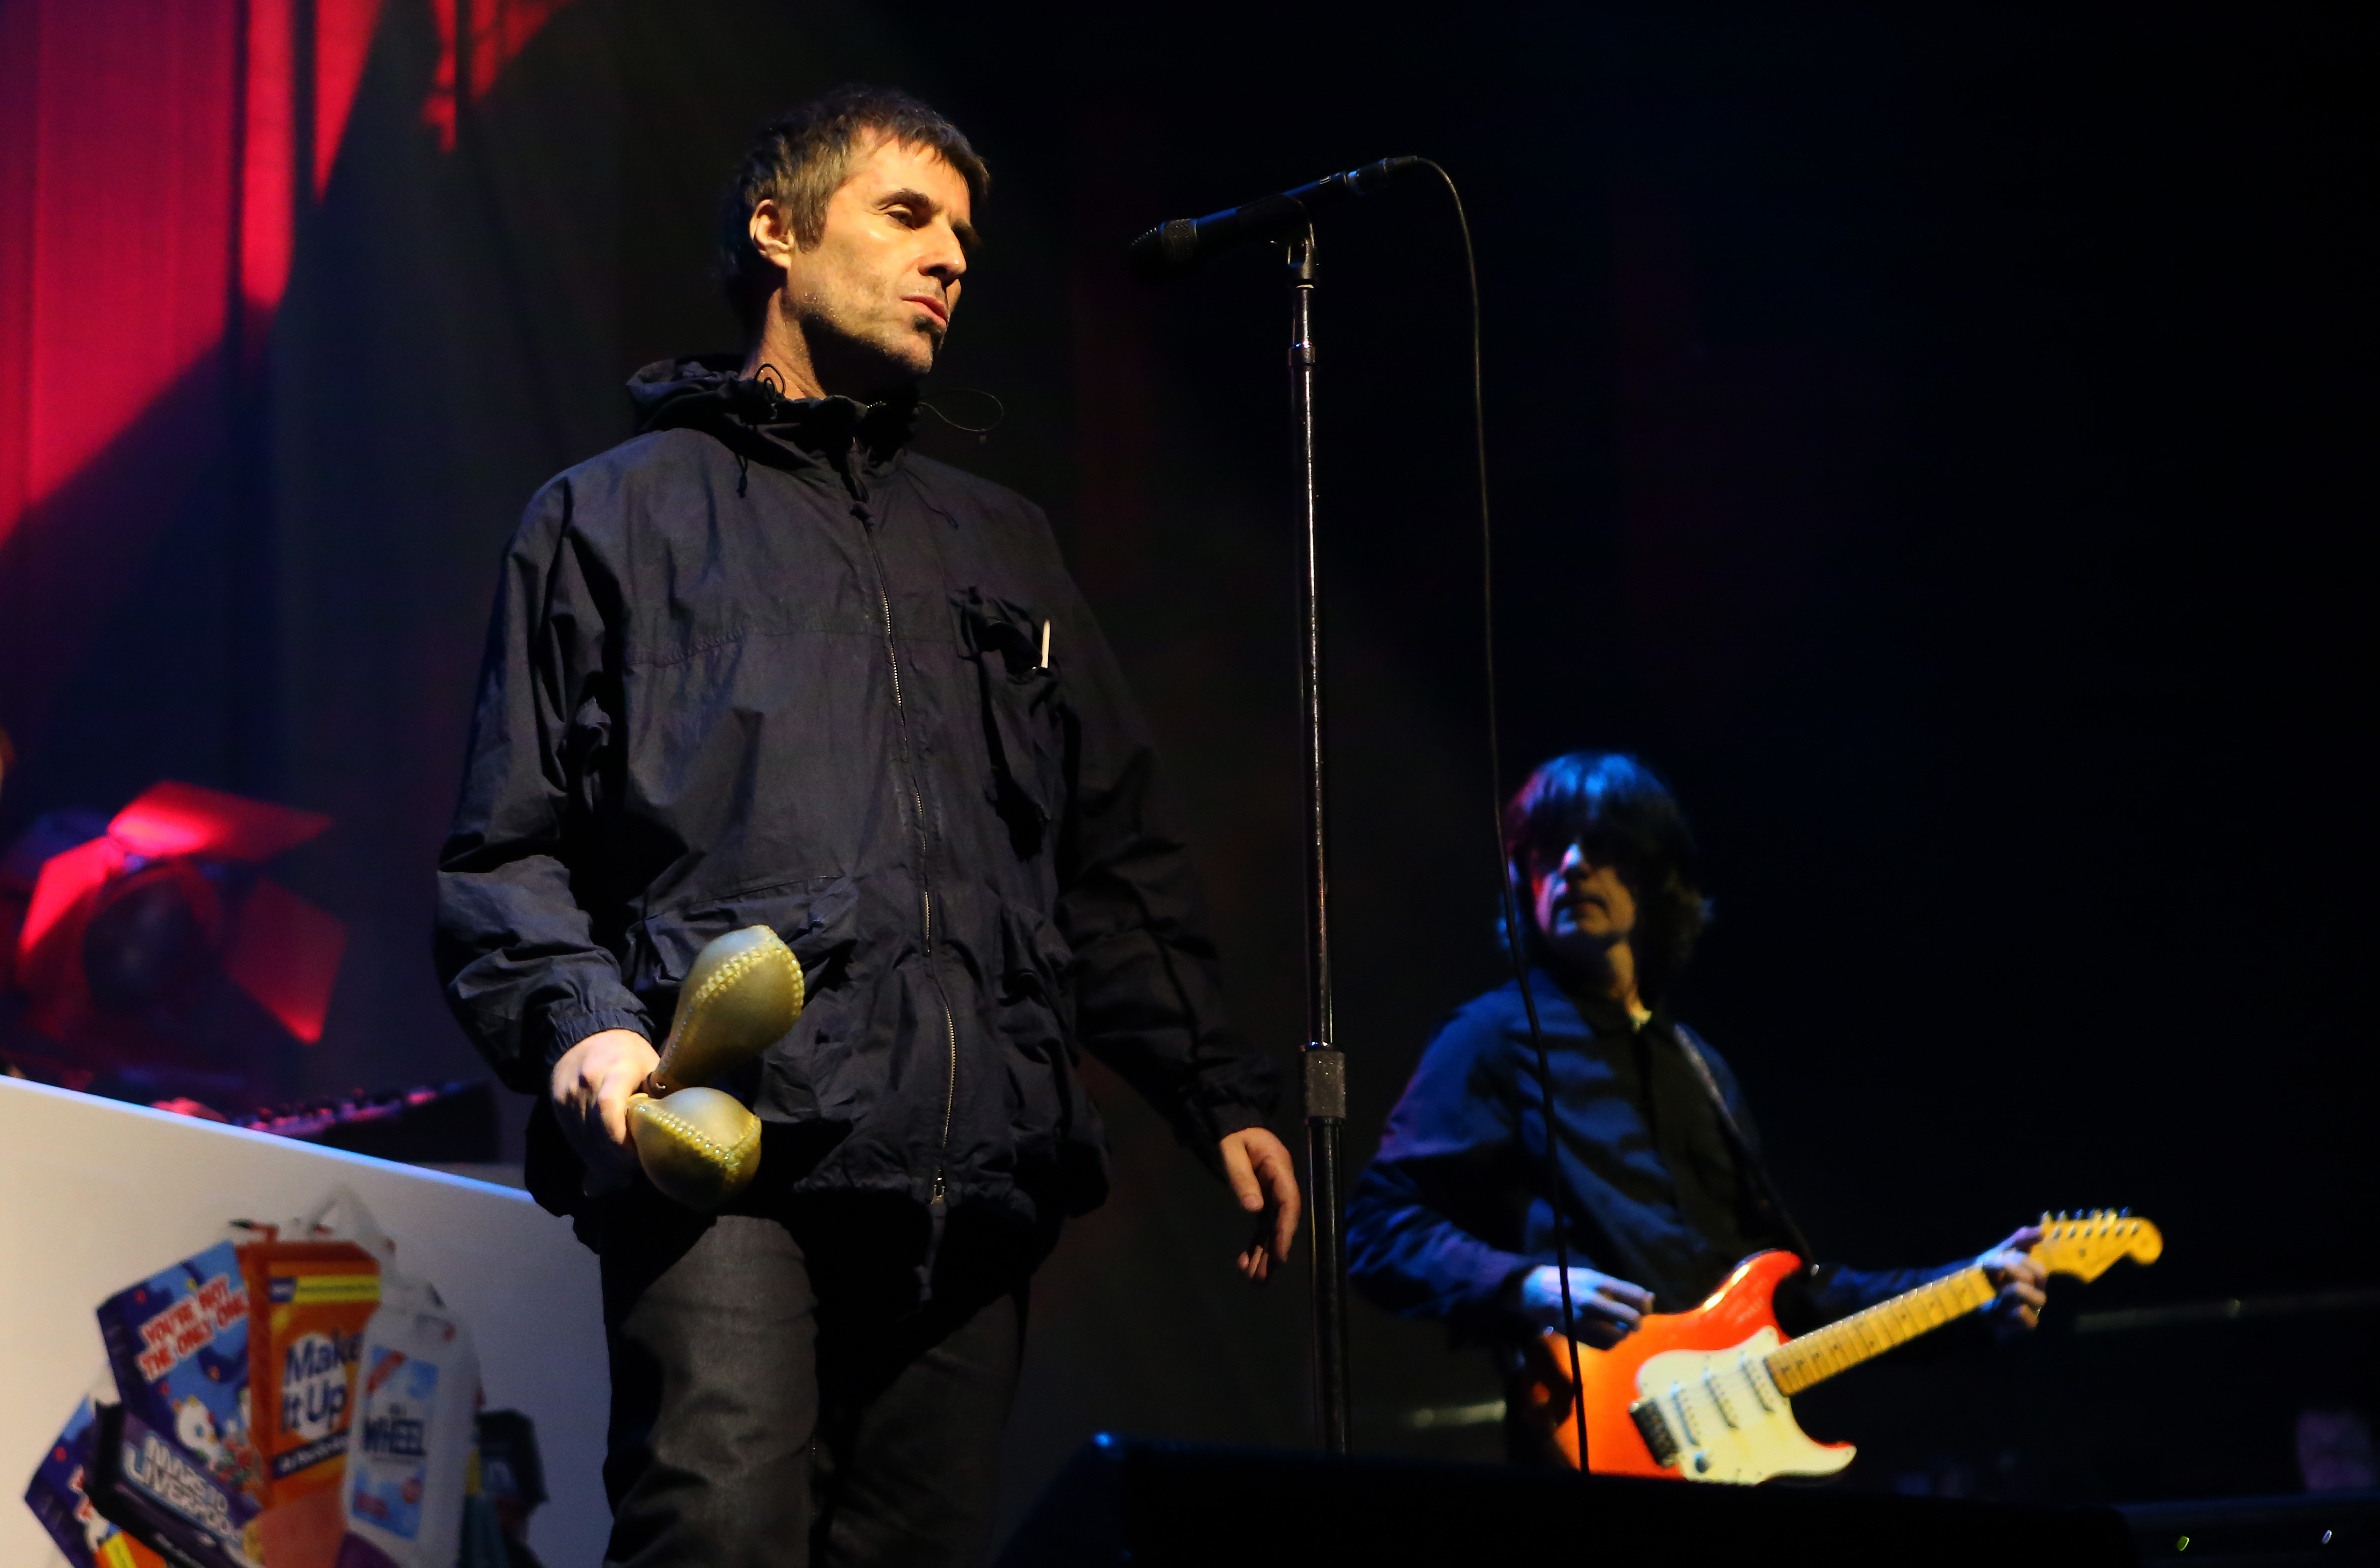 Liam Gallagher and John Squire at the O2 Forum Kentish Town were immense